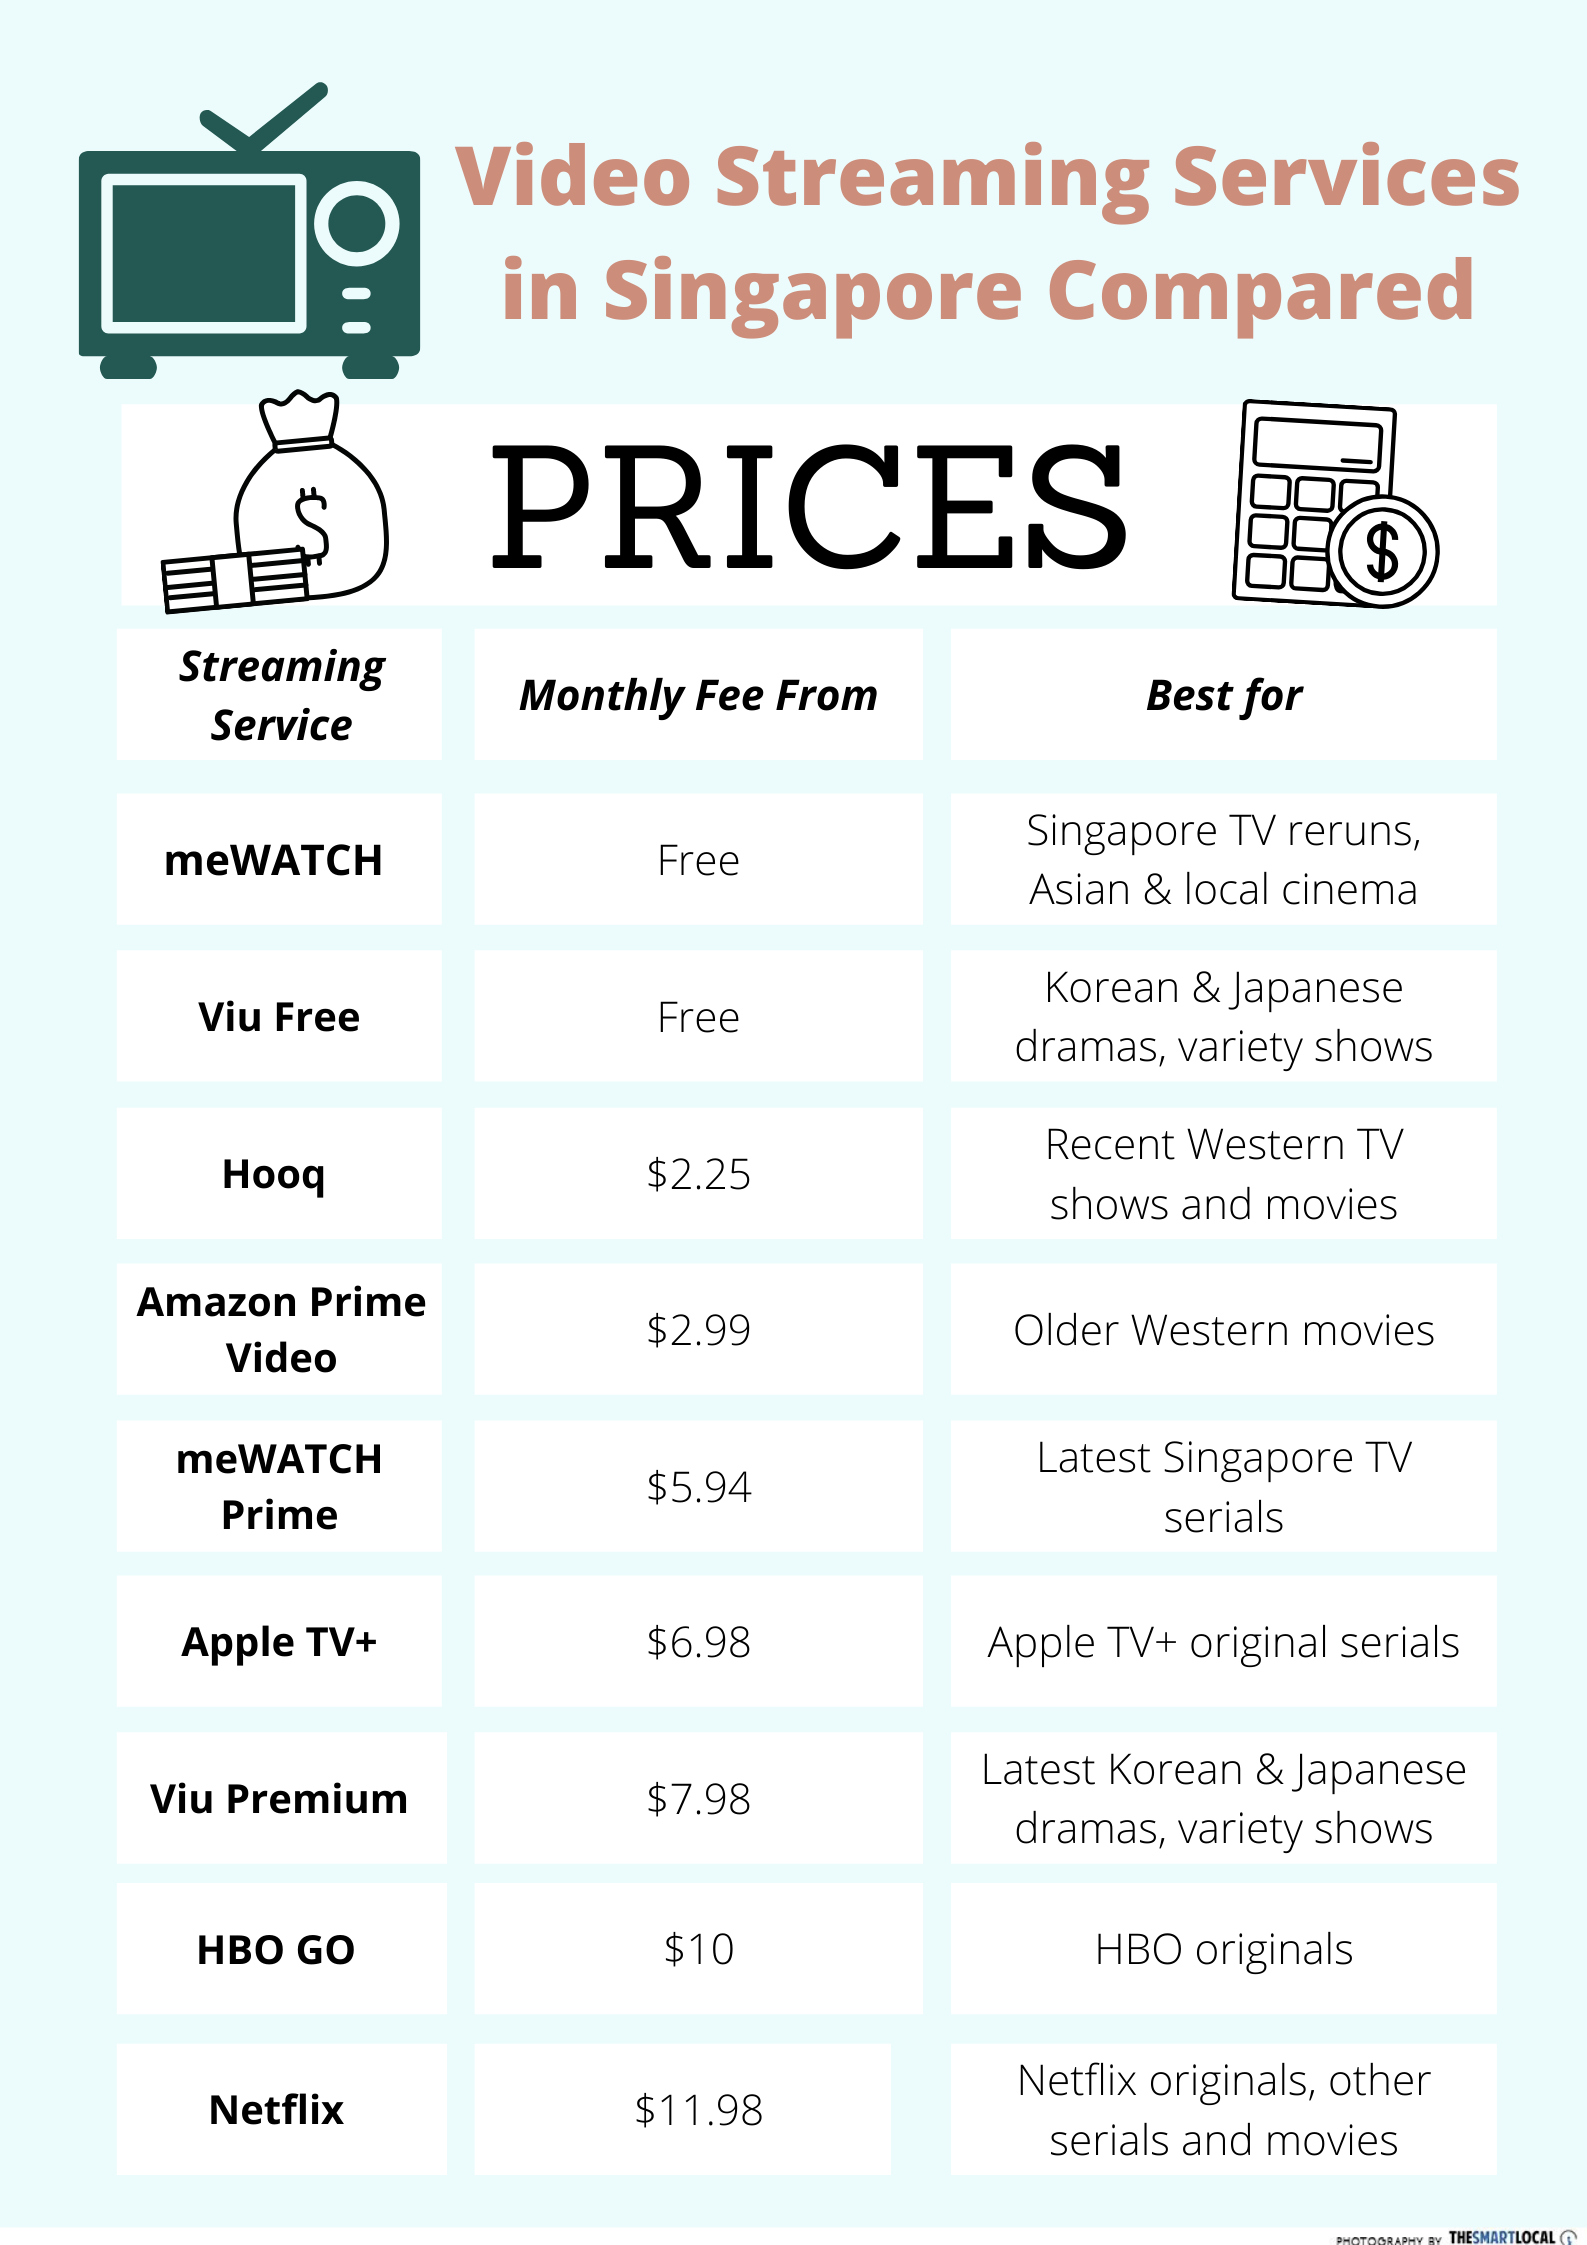 Prices of the video streaming services available in Singapore.